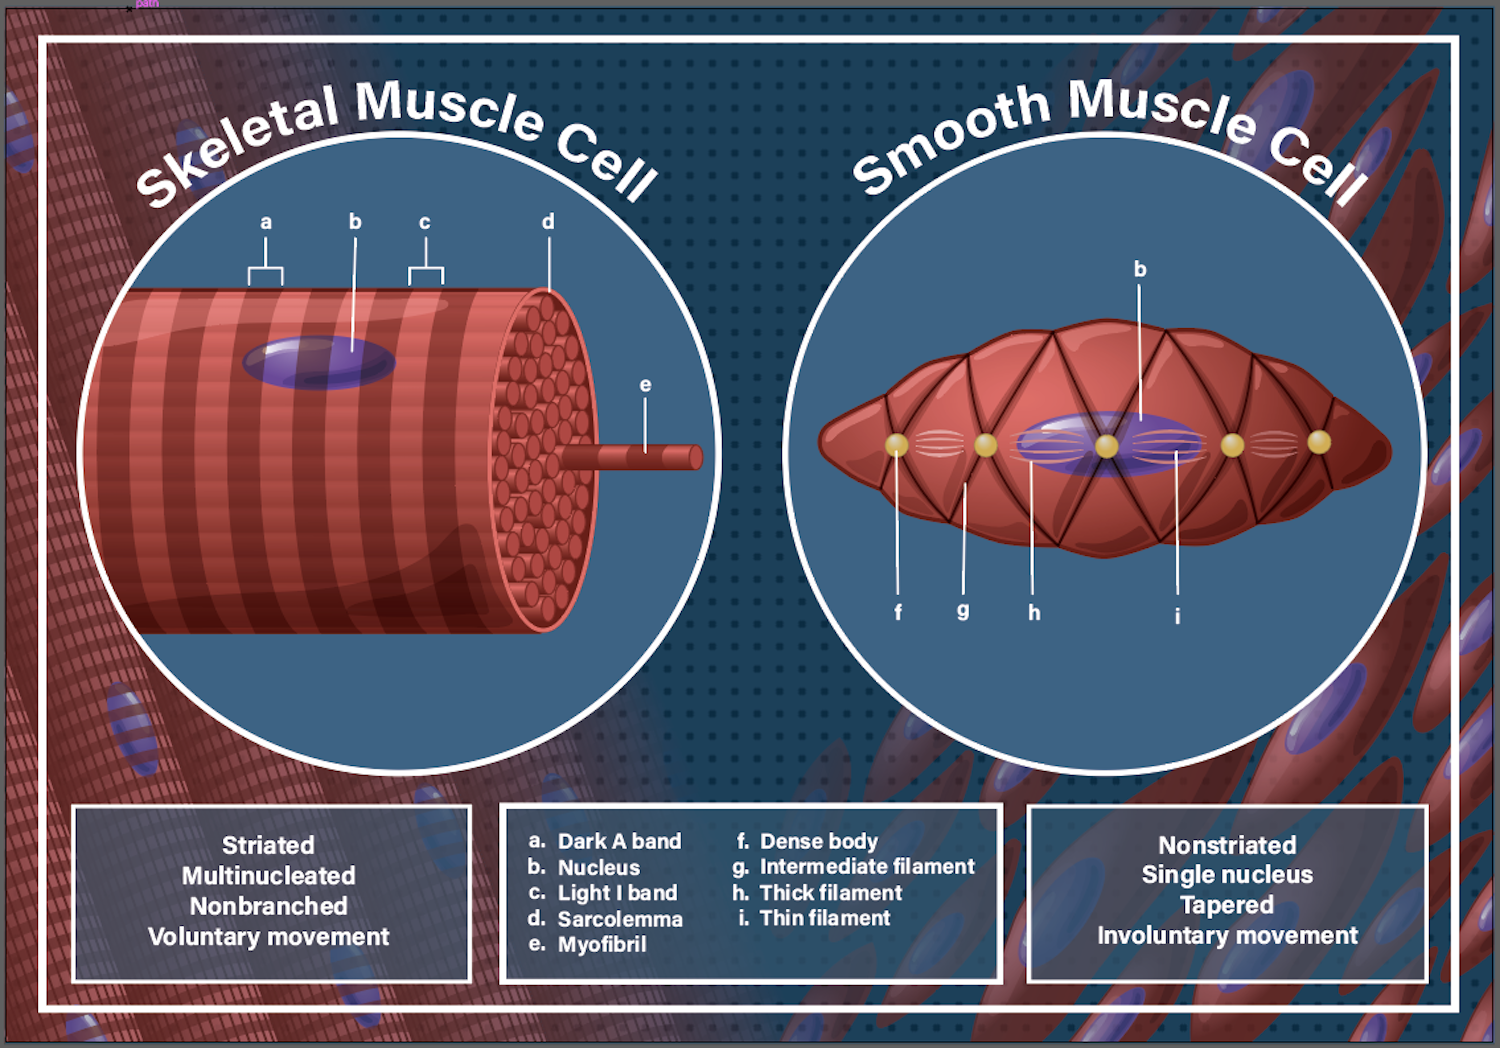 Skeletal Muscle Cell vs. Smooth Muscle Cell